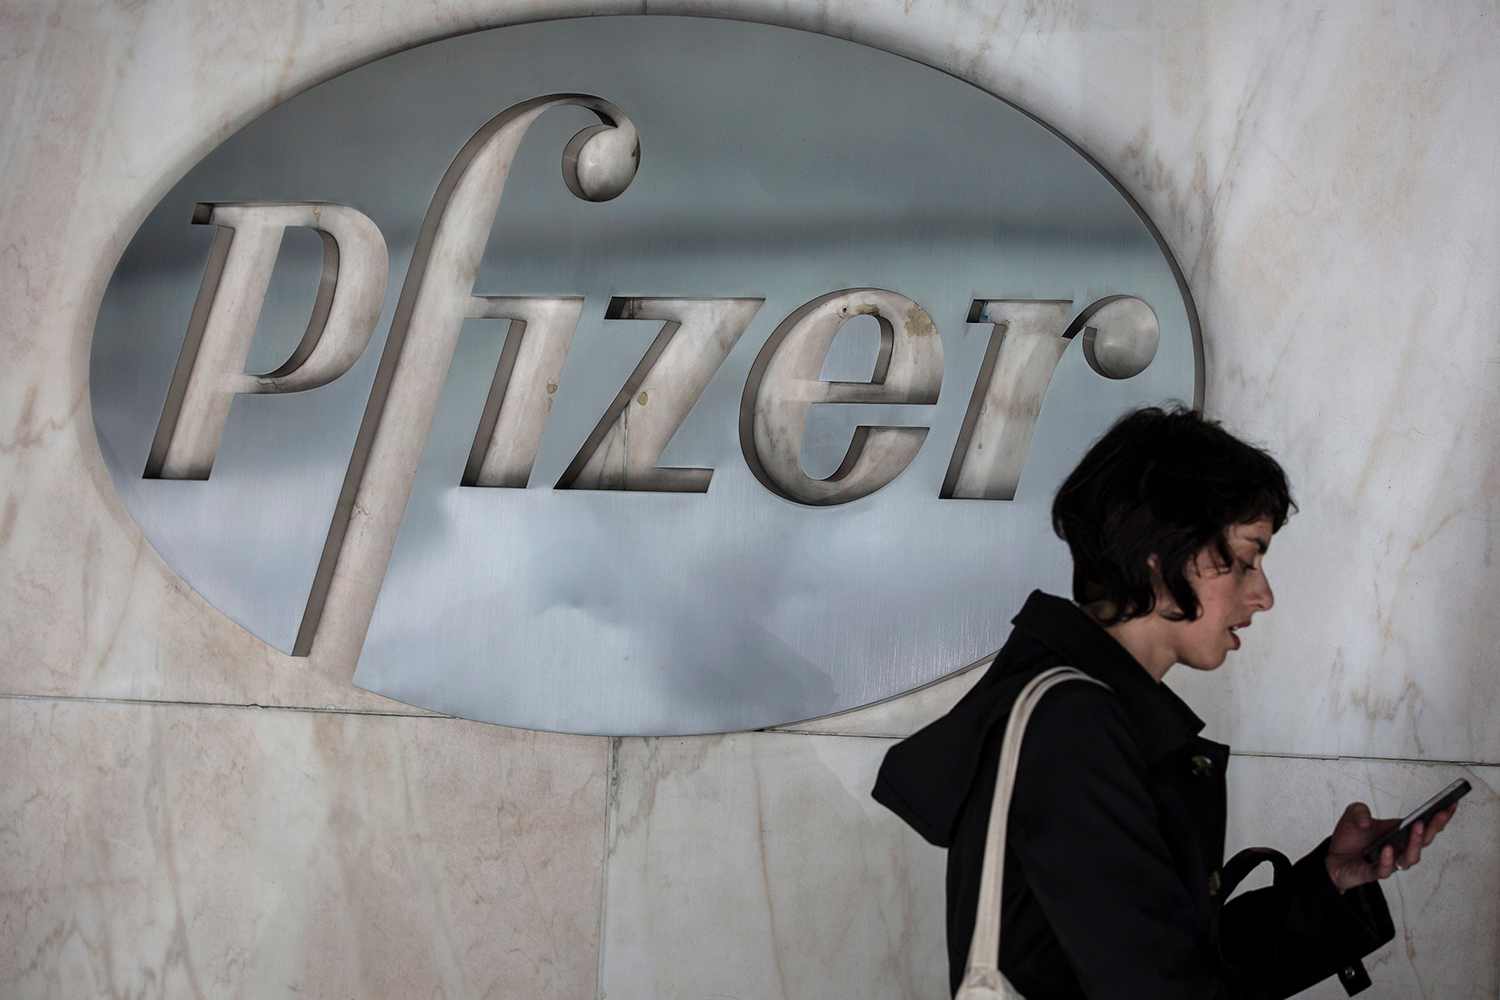 Pfizer confirms Allergan merger deal creating the world's largest drug company